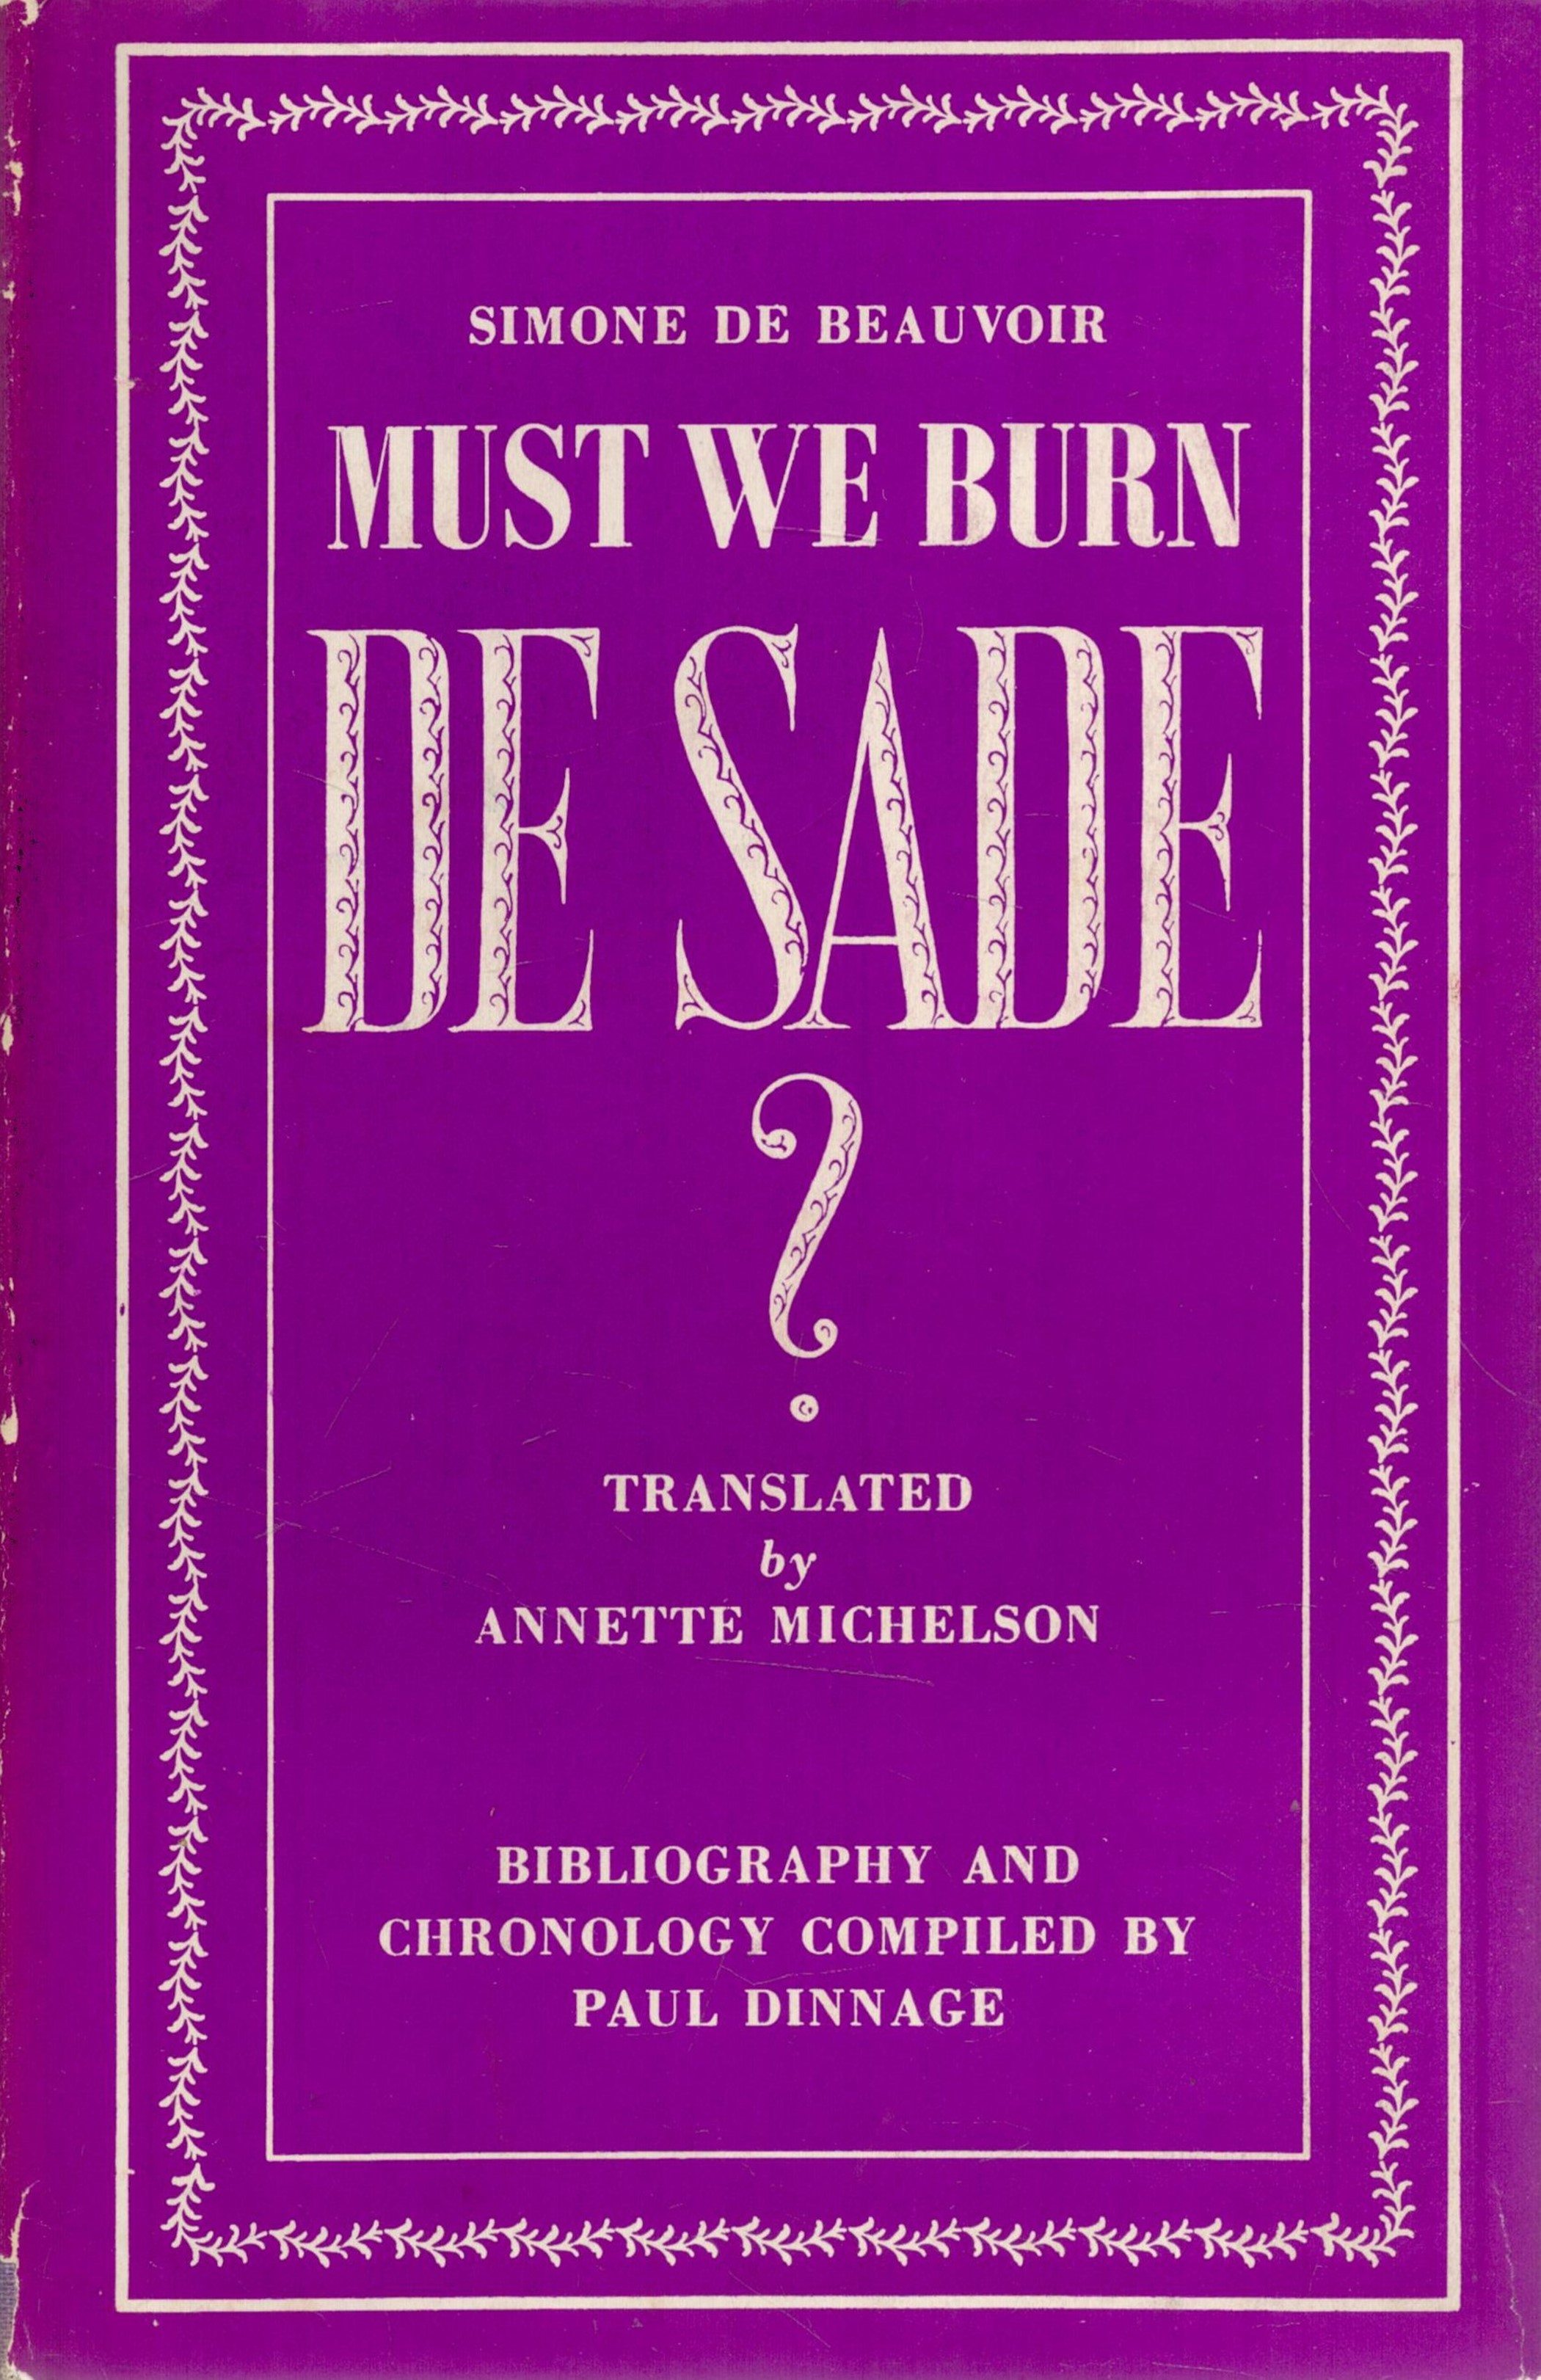 Must We Burn de Sade? By Simone de Beauvoir. Translated by Annette Michelson. Bibliography and